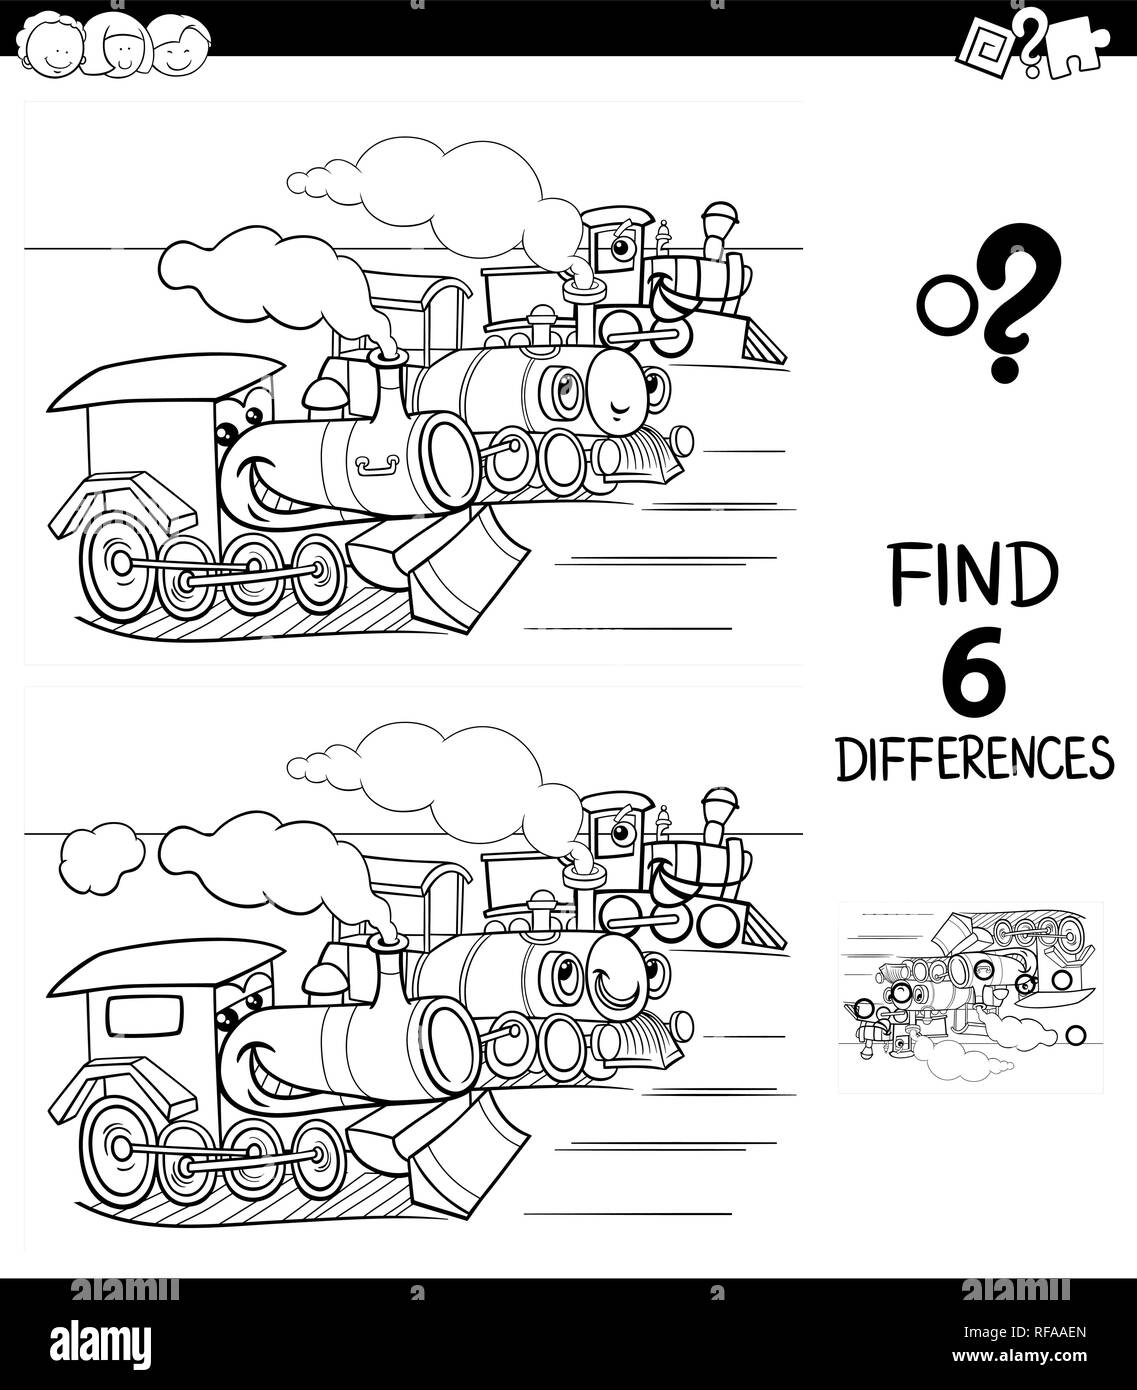 Black and White Cartoon Illustration of Finding Six Differences Between Pictures Educational Game for Children with Funny Locomotives Coloring Book Stock Vector